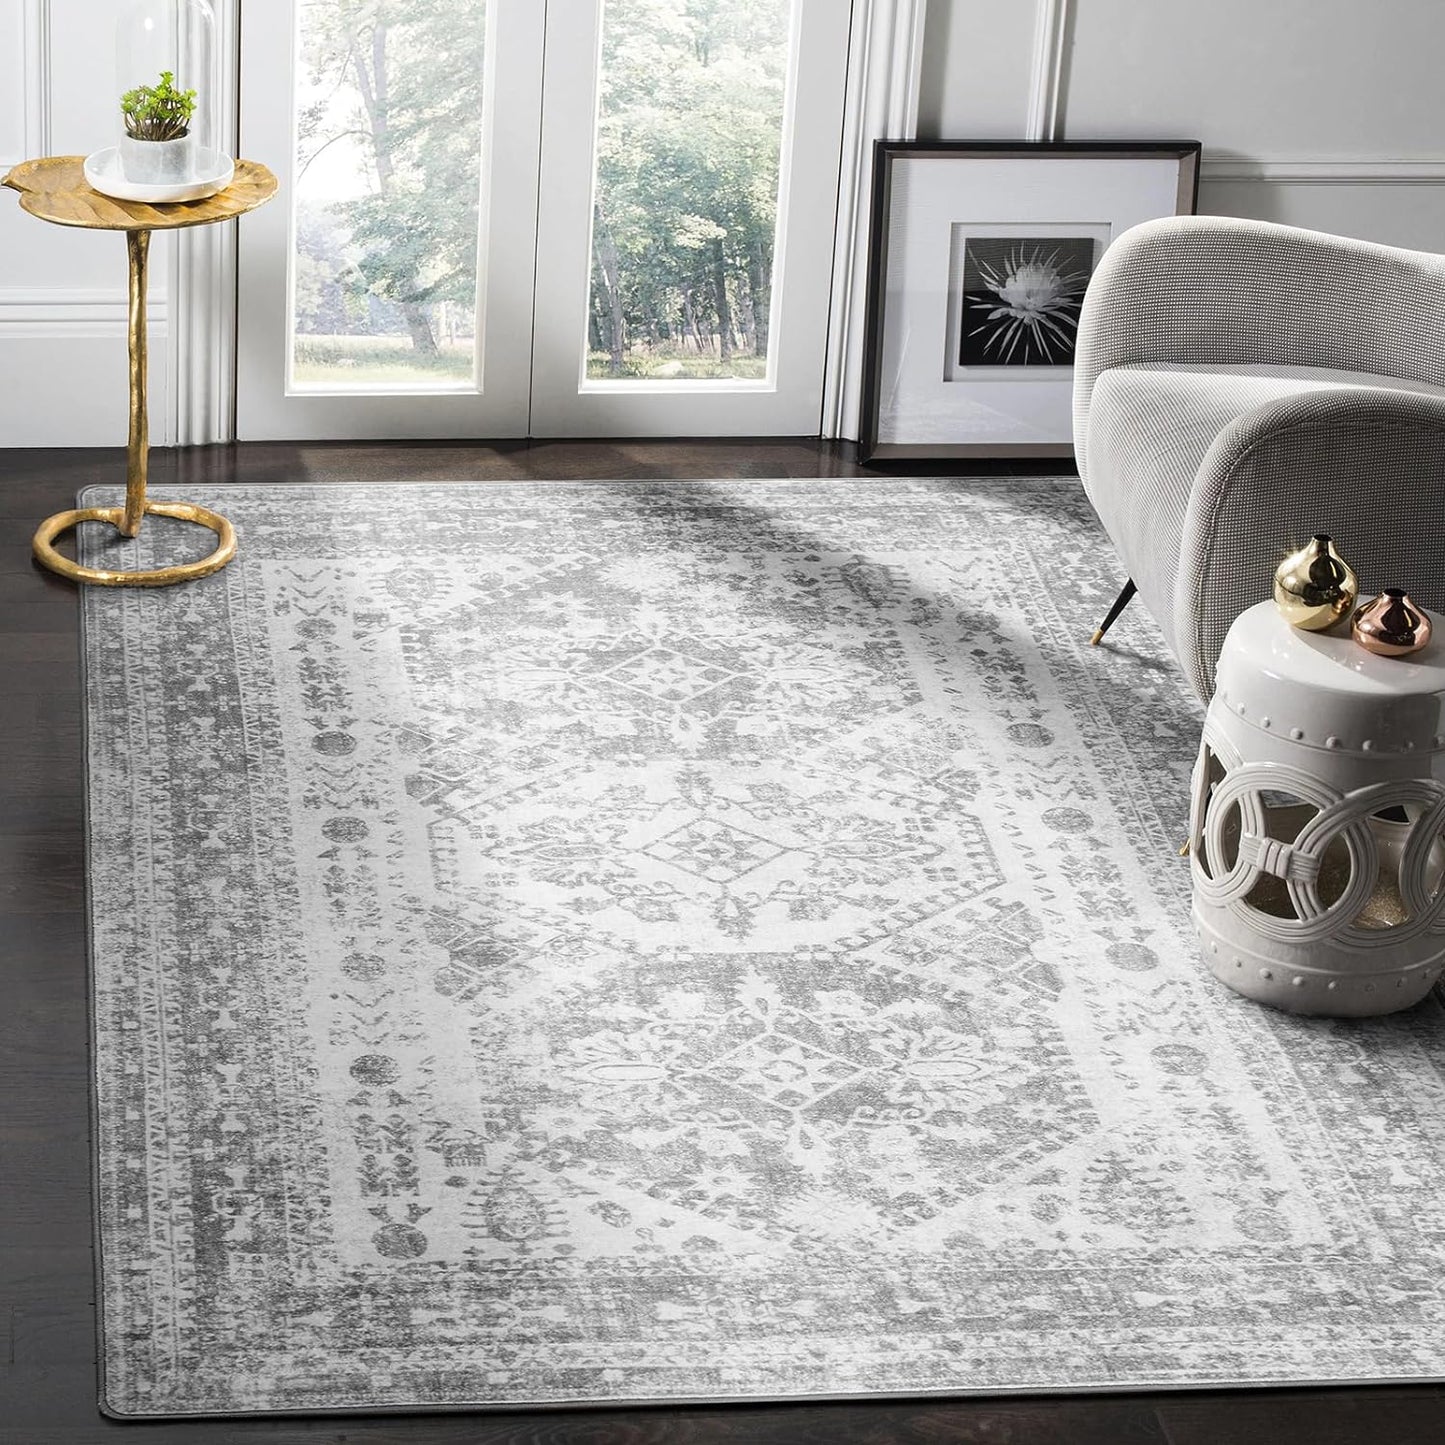 GENIMO Area Rug Machine Washable Bedroom Rugs Distressed Vintage Print Gray Large Throw Rug Dining Room Living Room Aesthetic, Non Slip Carpet with Gripper